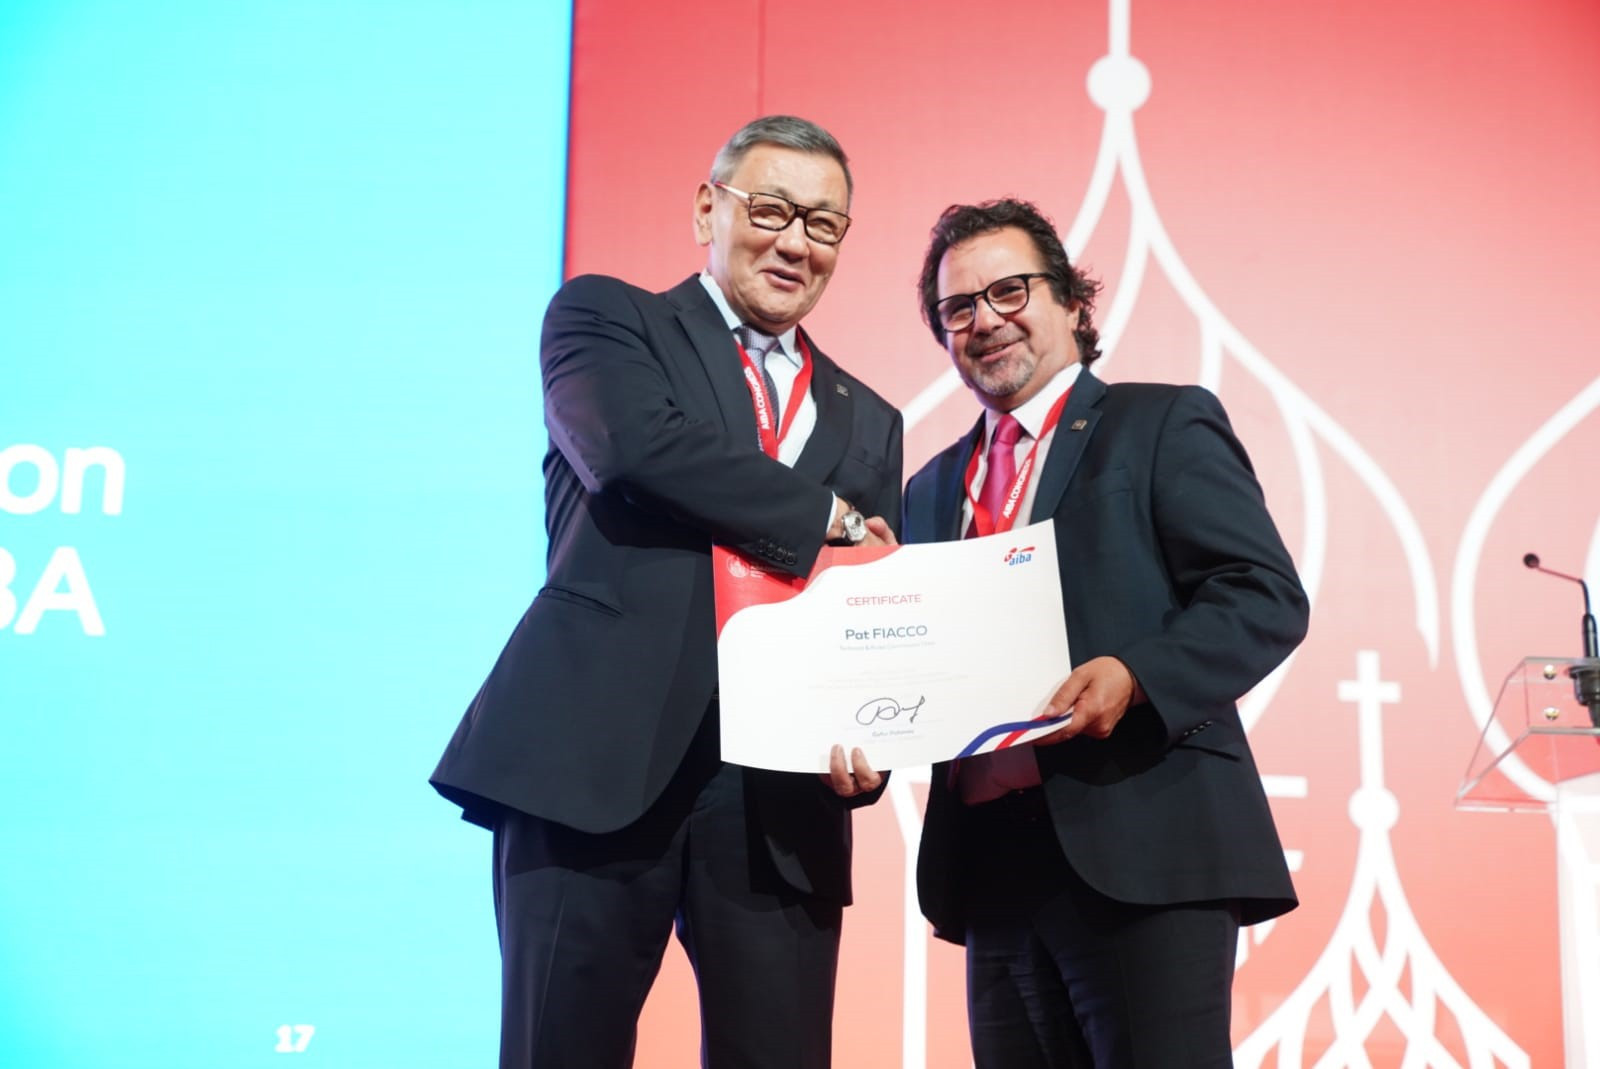 AIBA Interim President Gafur Rakhimov handed out certificates to key officials, including Canada's Pat Fiacco ©AIBA